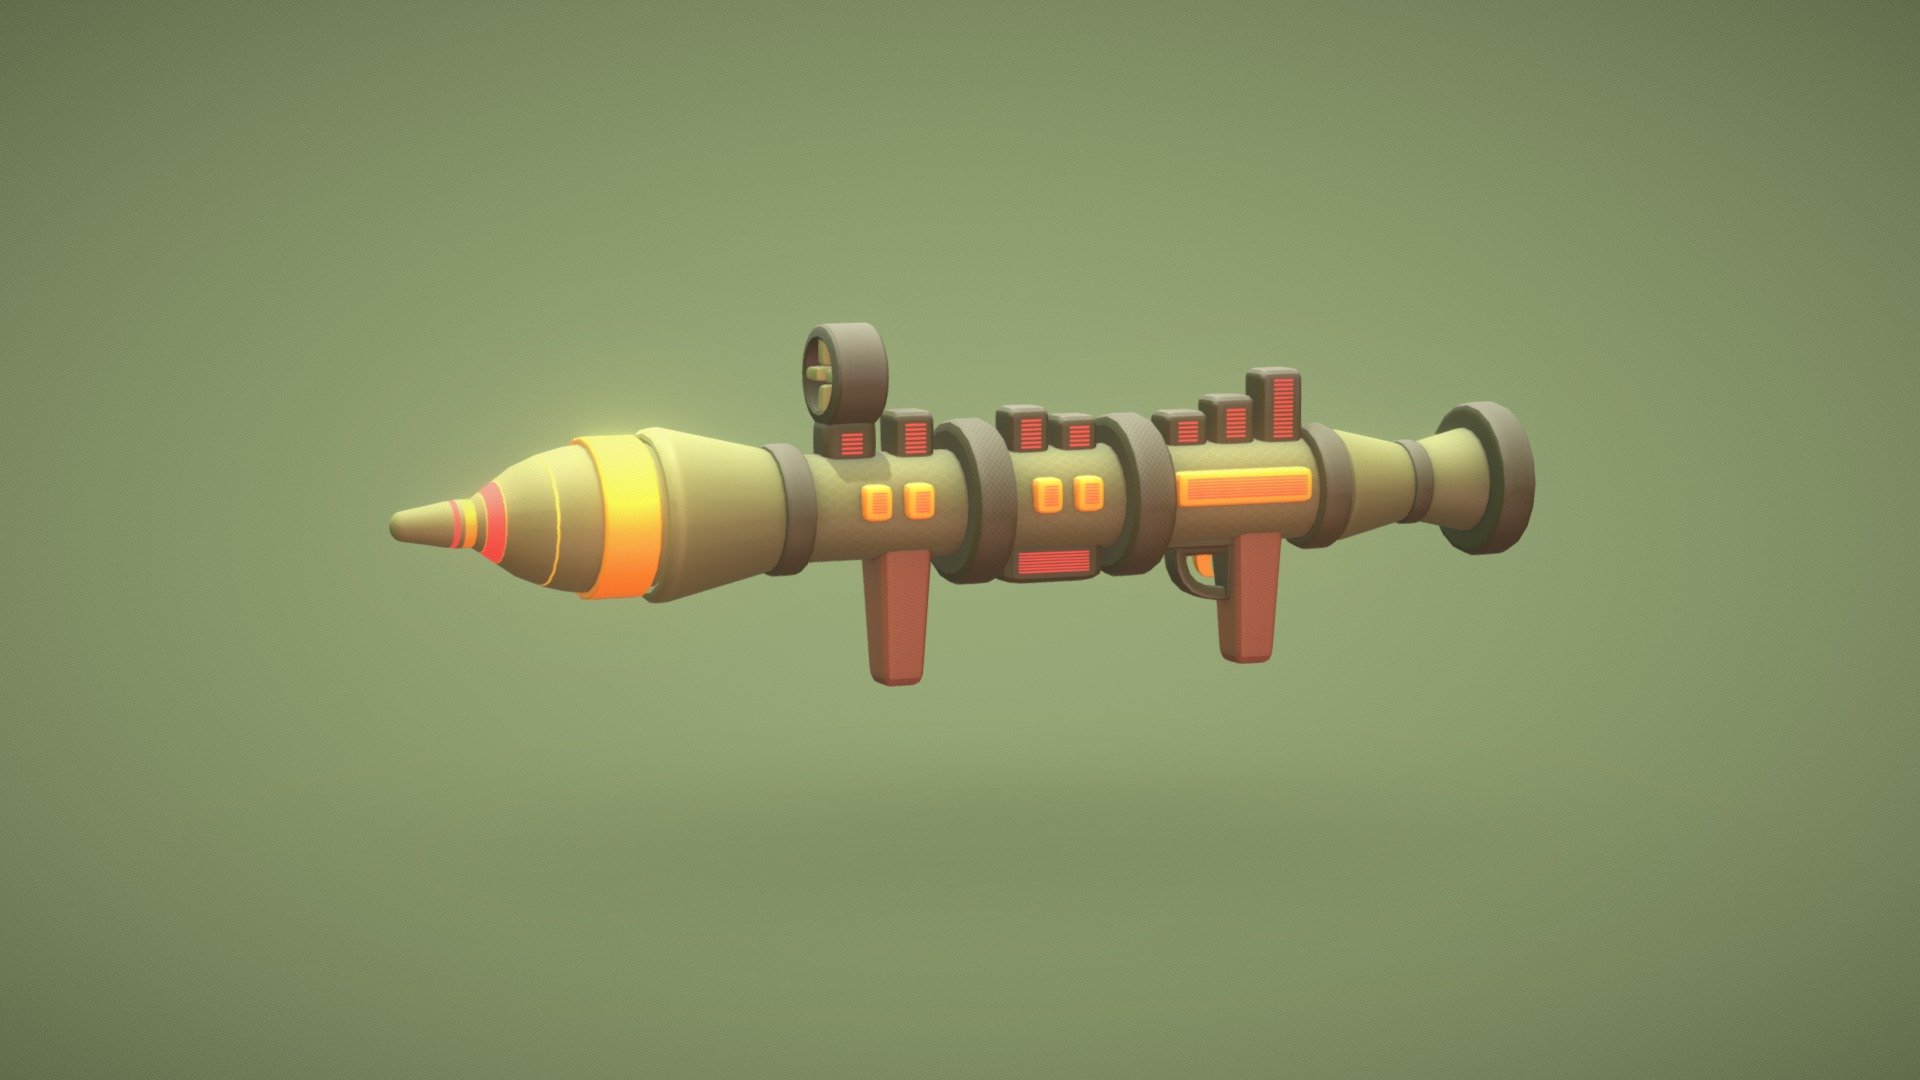 Game Ready Stylized Rocket Launcher with PBR textures


*Cartoony 3d model of Rocket Launcher that destroys all the Enemies and Obstacles *


***All textures and materials are included in the file. ***




File can be used for Games

File can be used for Ar, Vr, movies or any personal project

It can be also used for other 3d purpose

1k,2k, 4k and 8k textures are added in the file

Note : If you have any problems regarding download or the file not opening , feel free to contact us . We will help you as soon as possible.

Do Check and Subscribe our page for more updates



Instagram

Facebook

Artstation



We are also available for any 3d projects .For any bulk order of game assets get in touch for quotes 3d model